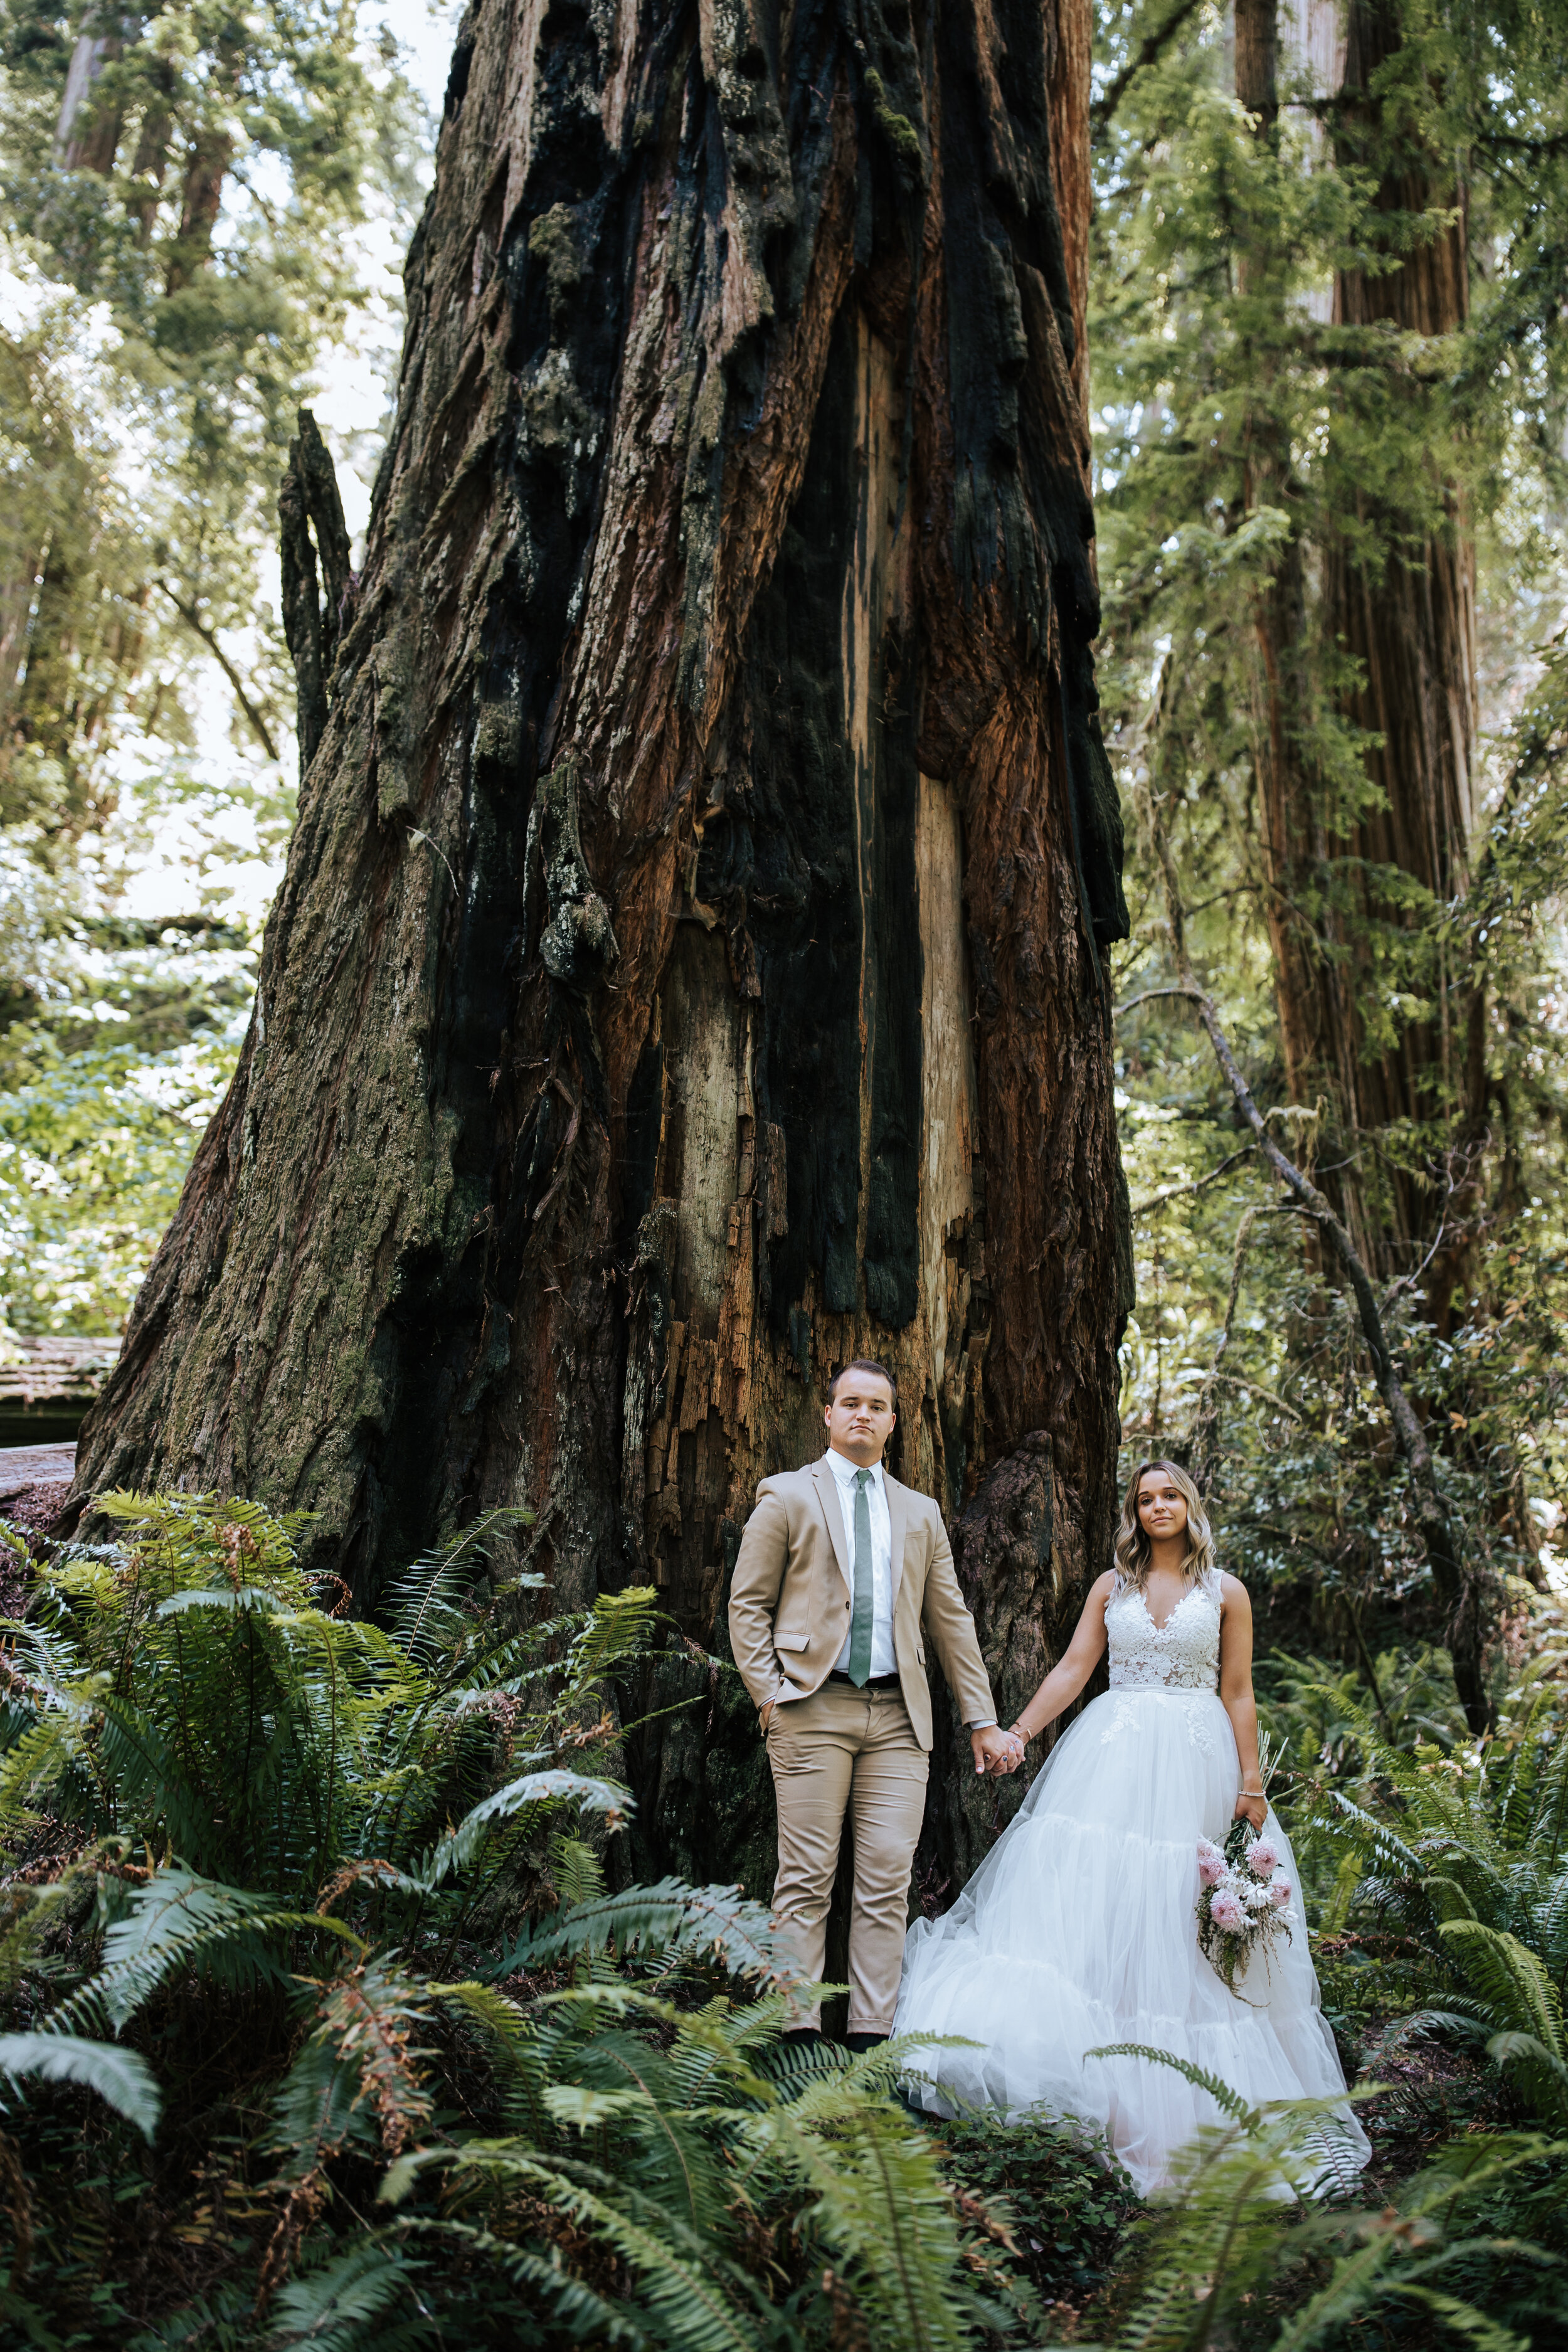  Bride and groom eloping in the Redwoods in California. Close up bride and groom. Redwoods elopement photographer wedding in Redwoods National Park. Elopement in the forest. Wedding attire wedding dress inspo Redwoods bridals #californiaphotographer 